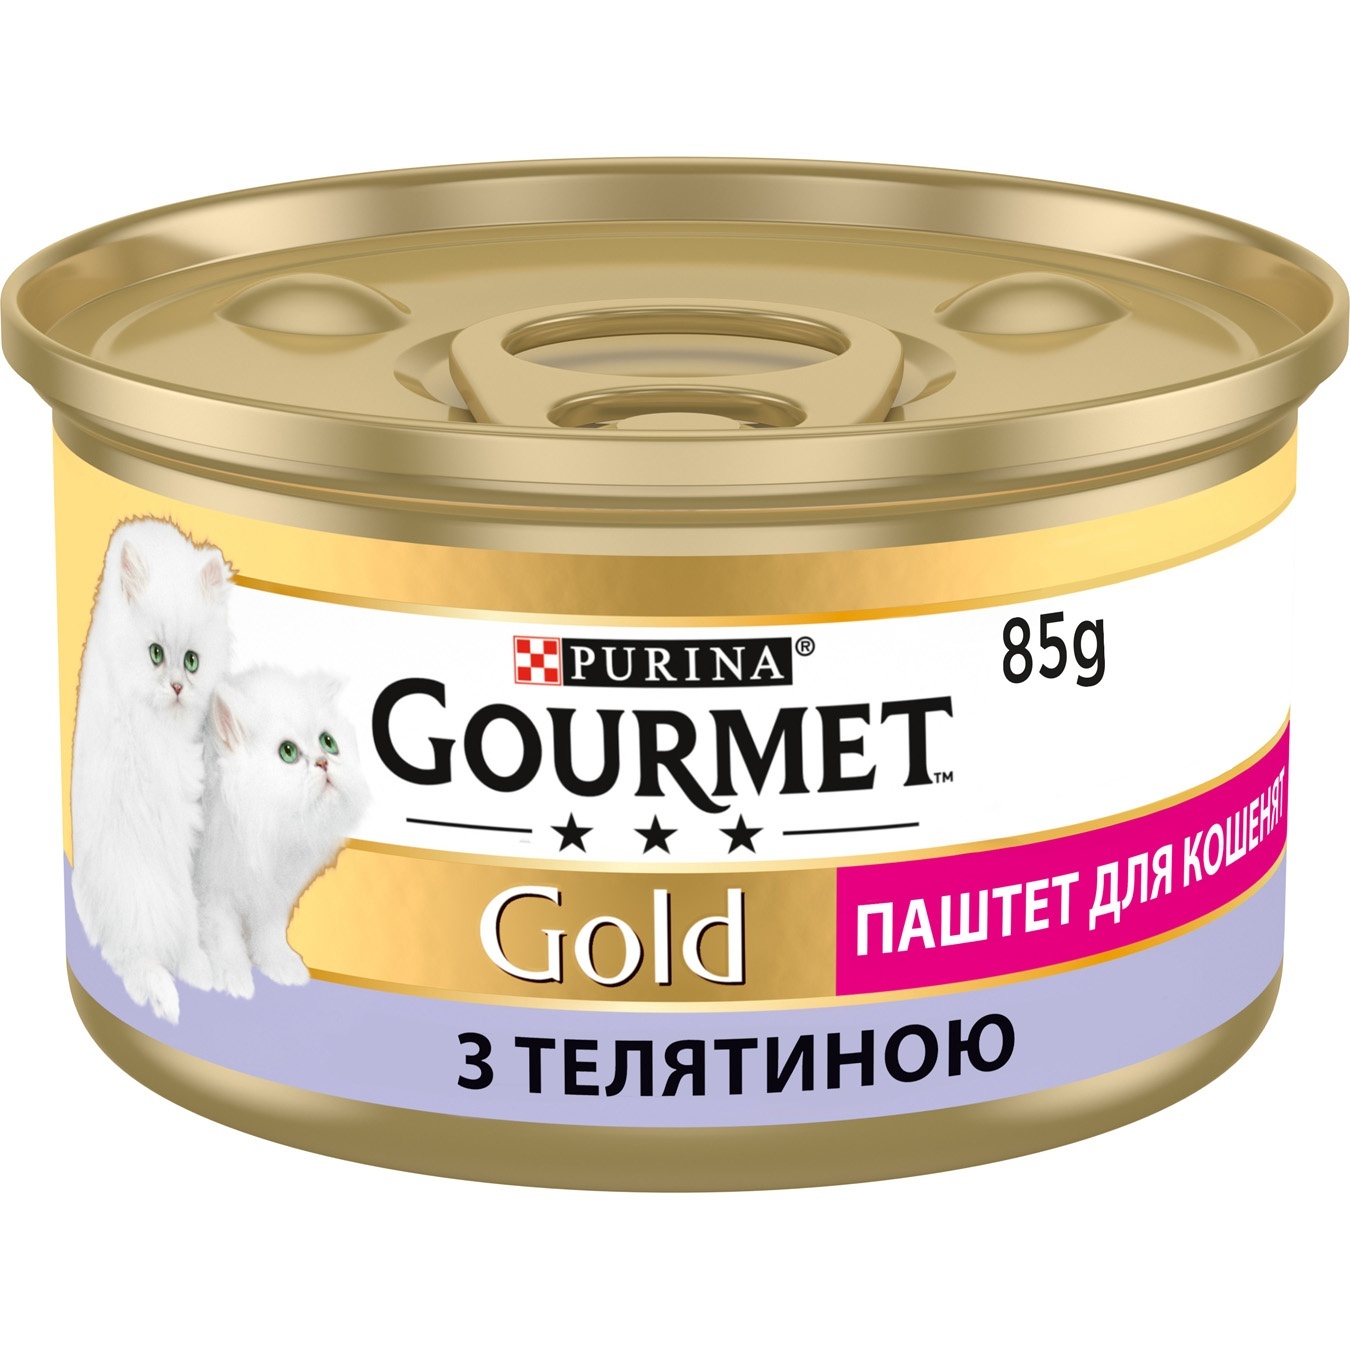 Purina Gourmet for kittens with veal pate food 85g